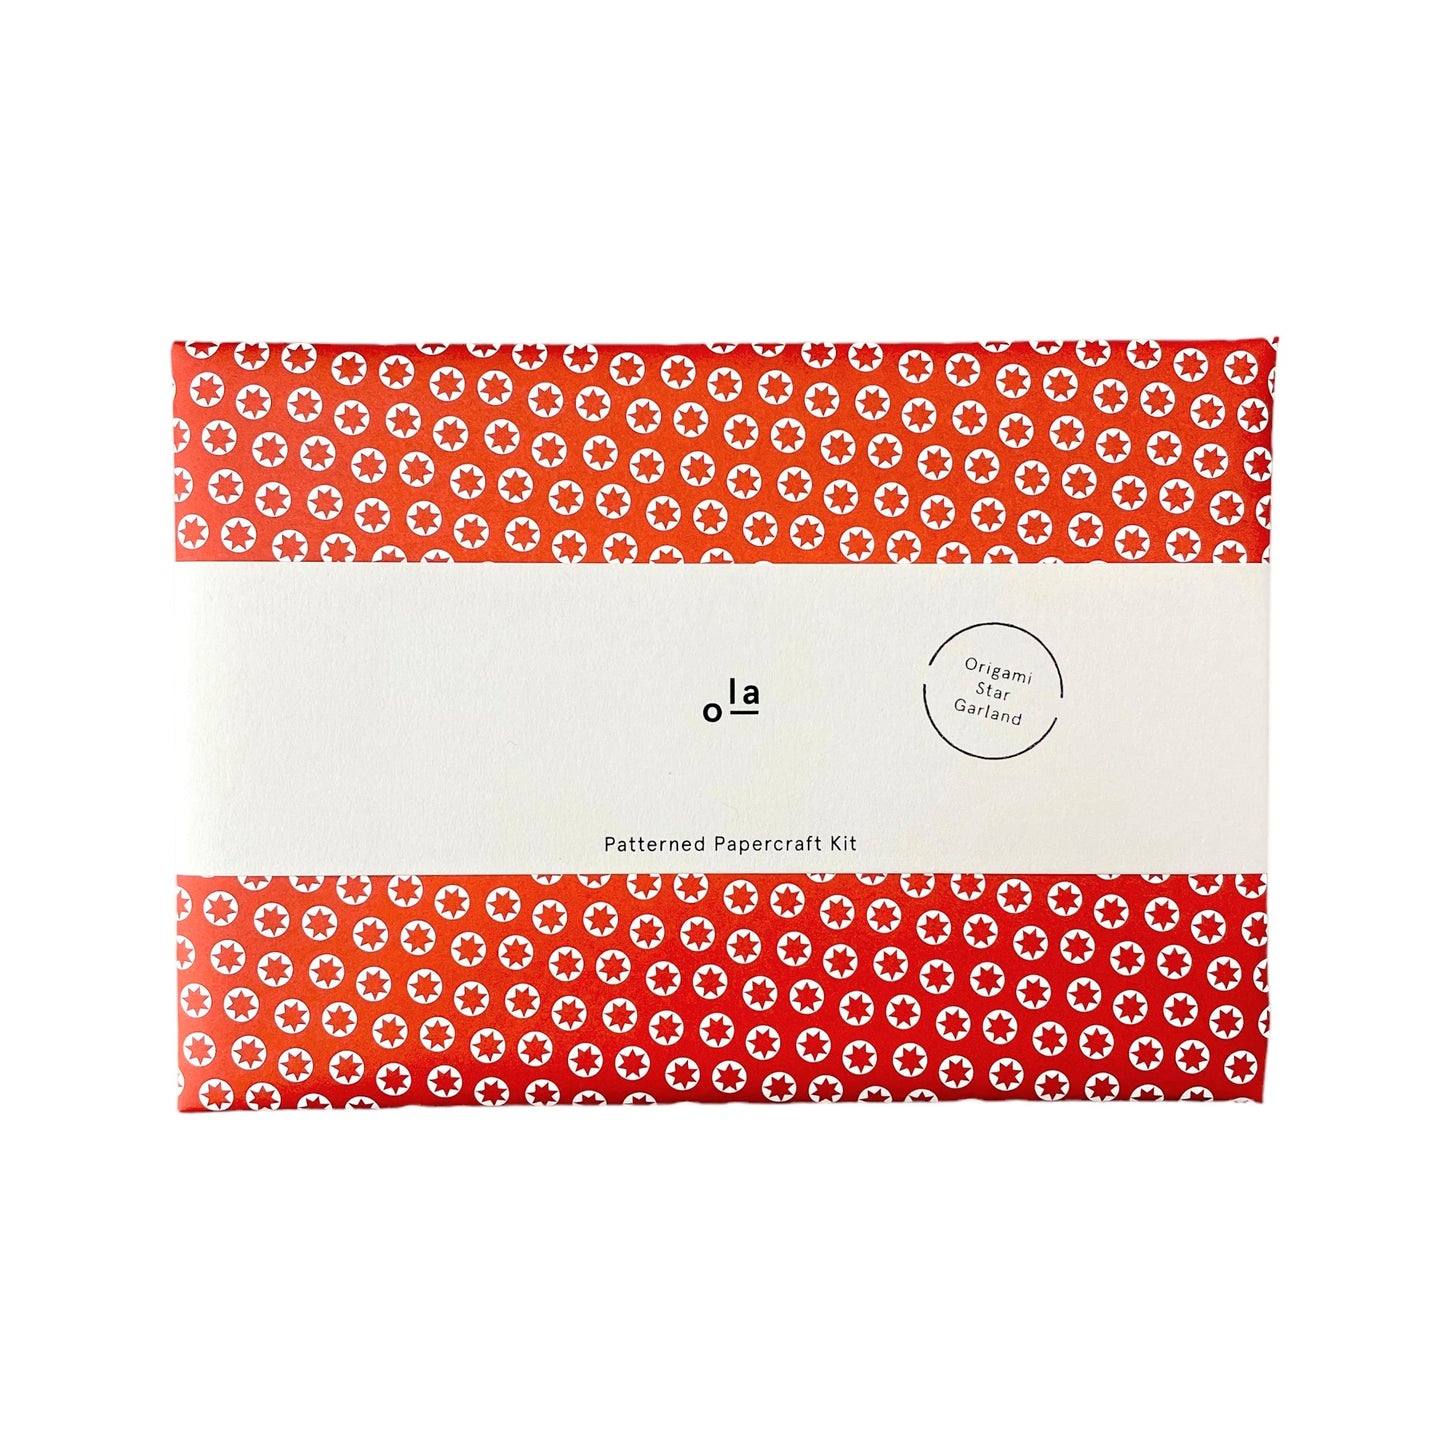 A garland of small paper origami patterned stars "lucky stars" , pictured is the outer red envelope packaging with branded belly band